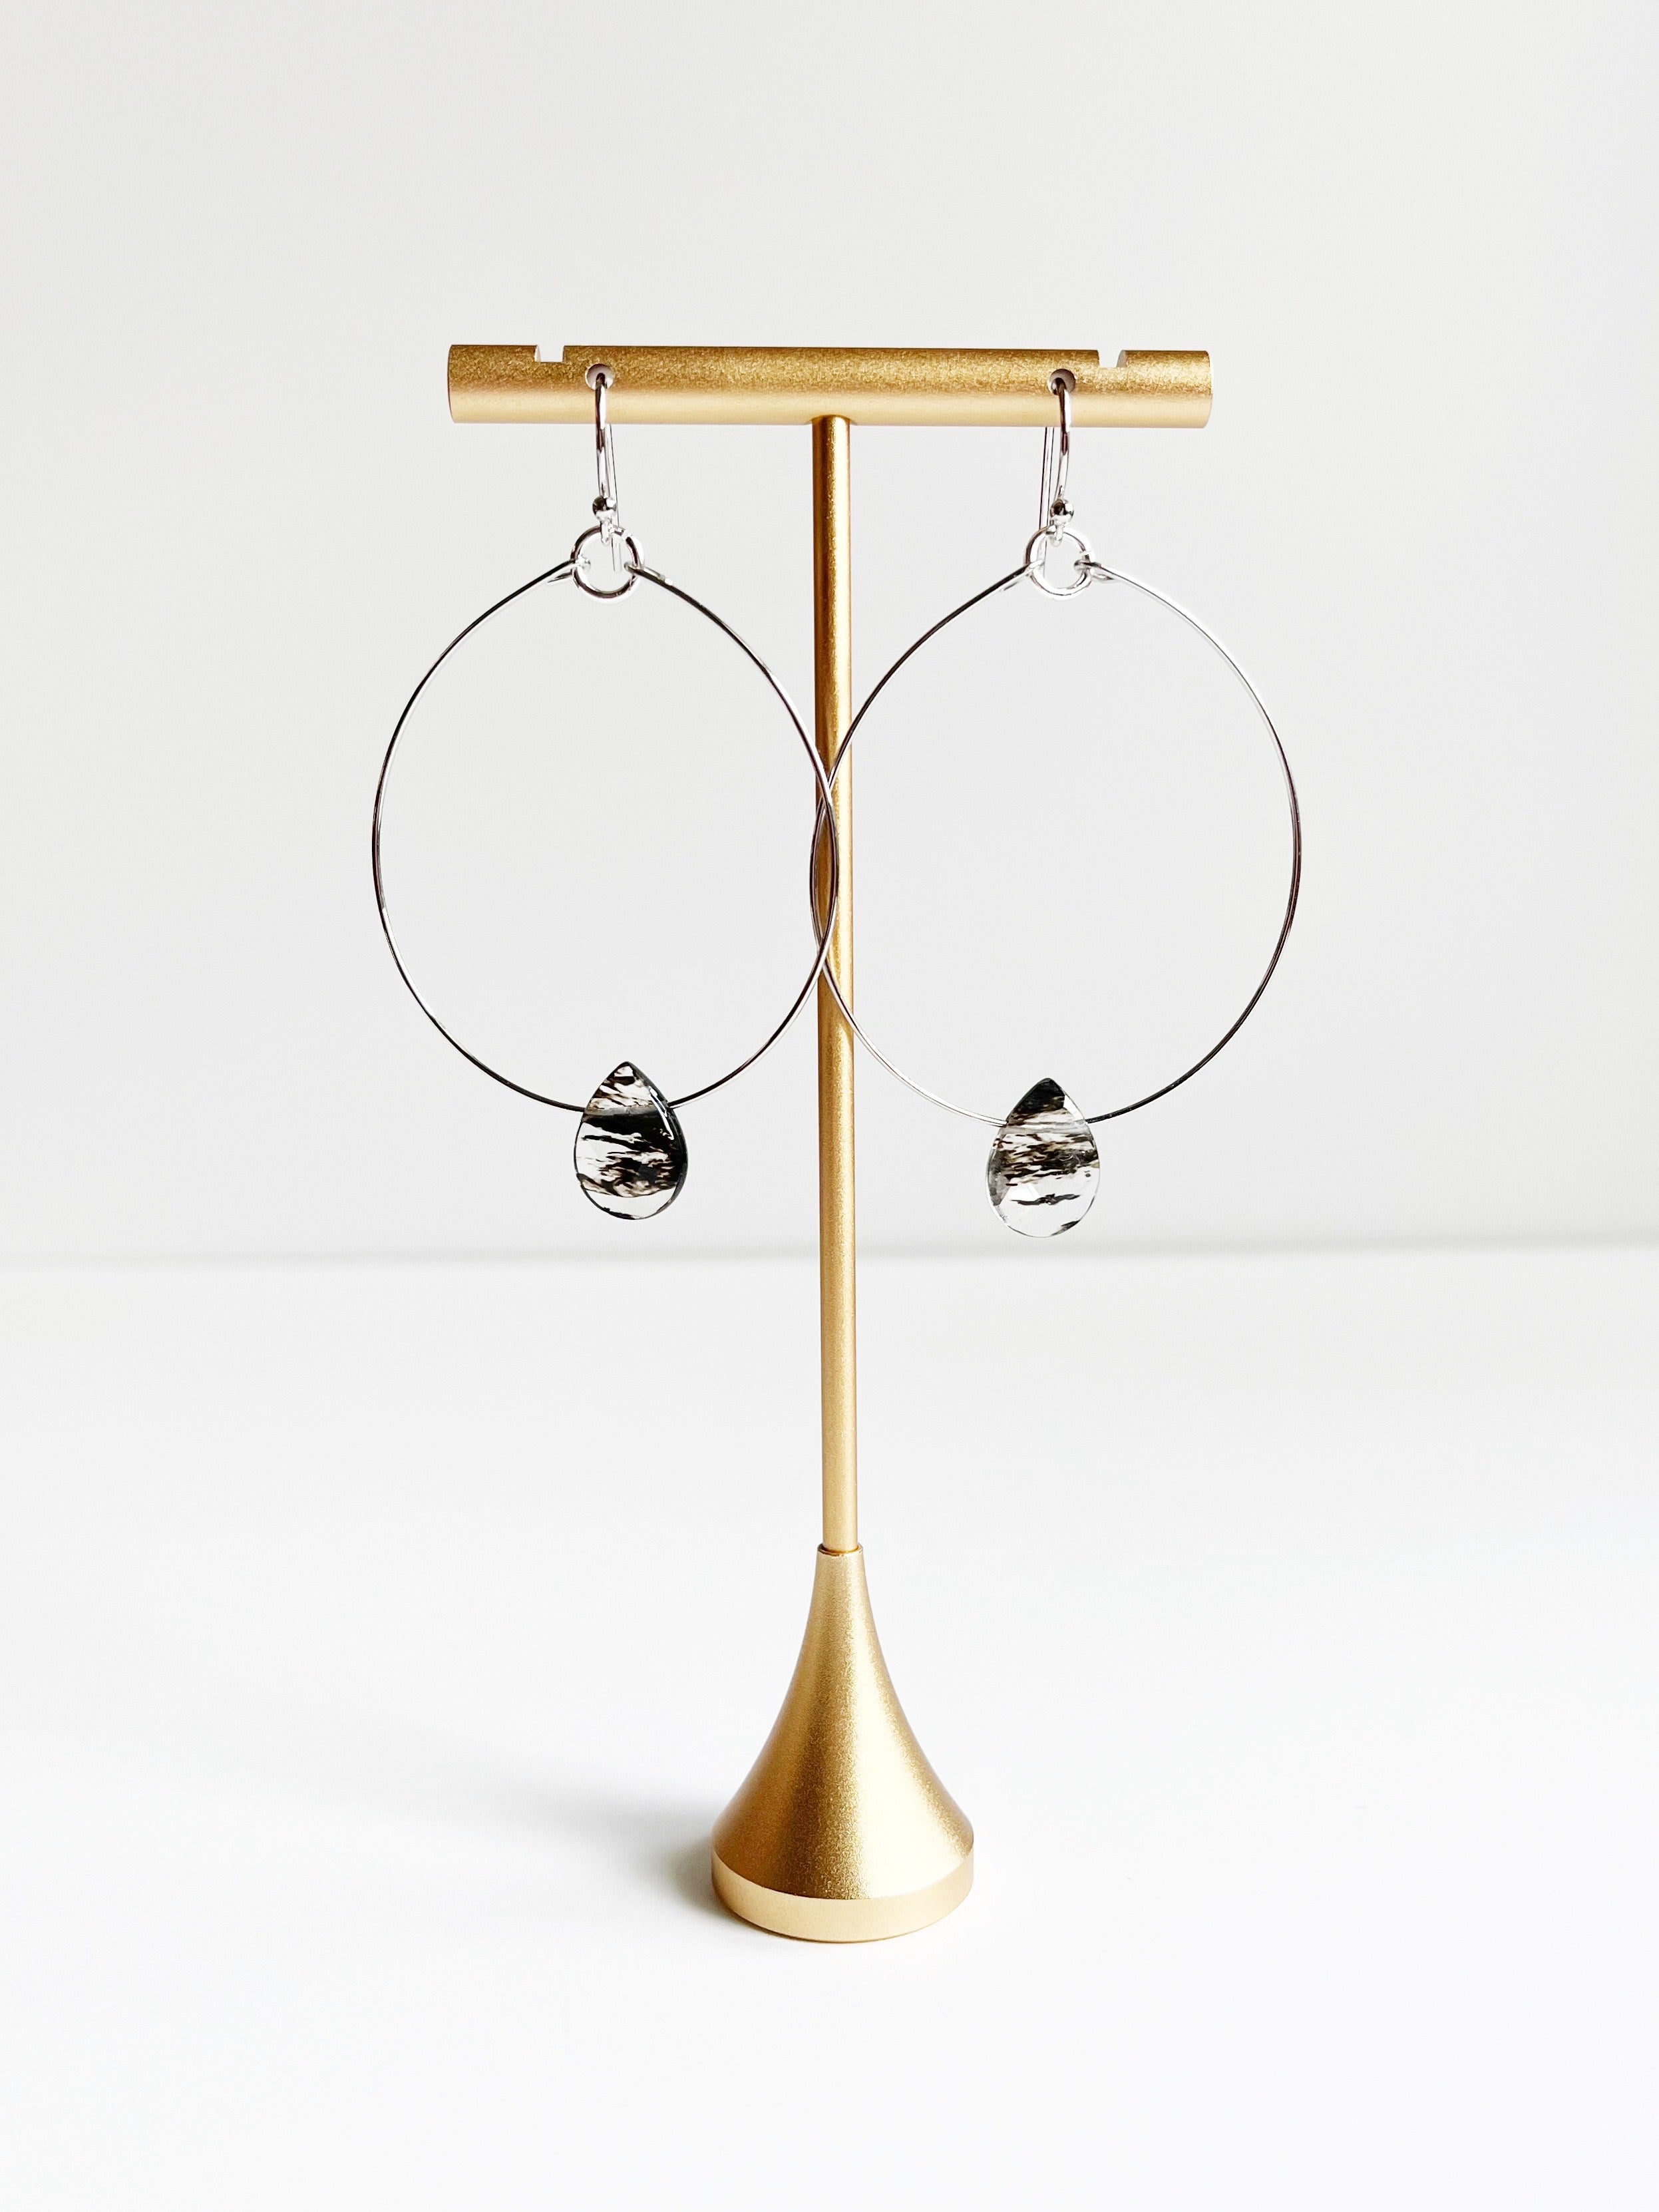 silver statement earrings displayed on gold tstand